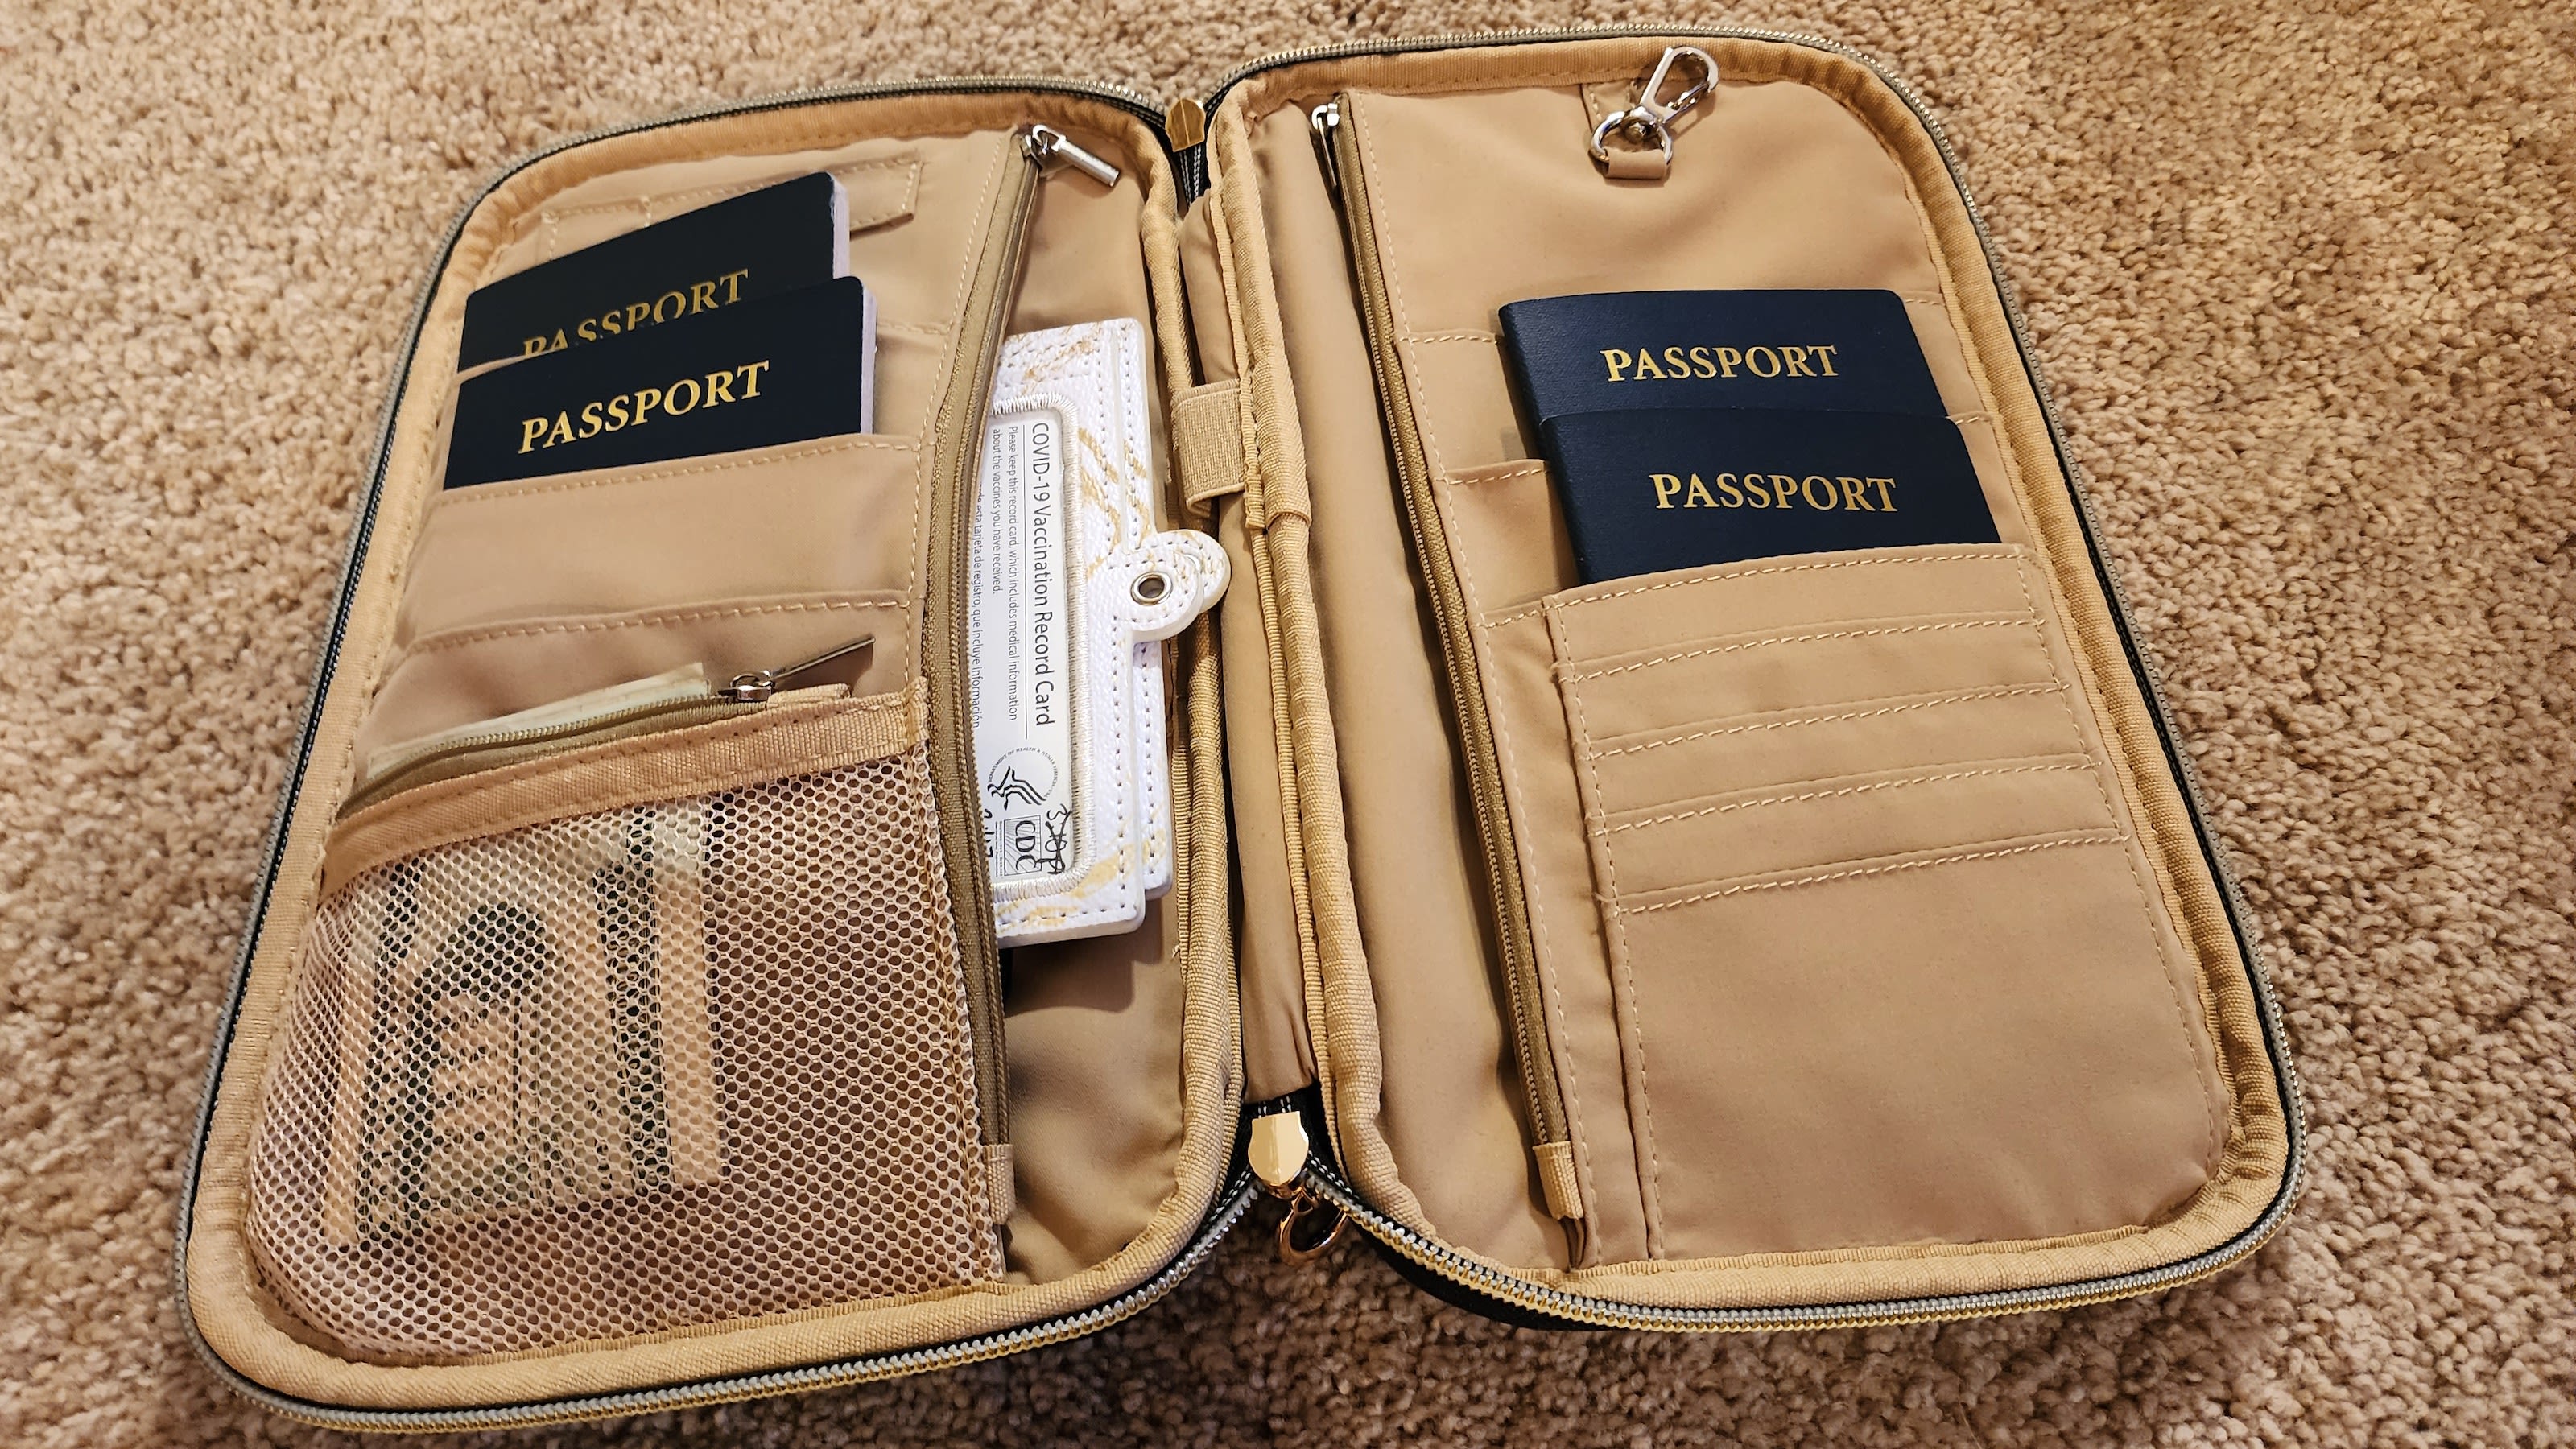 The Heouvo Travel Passport Holder review